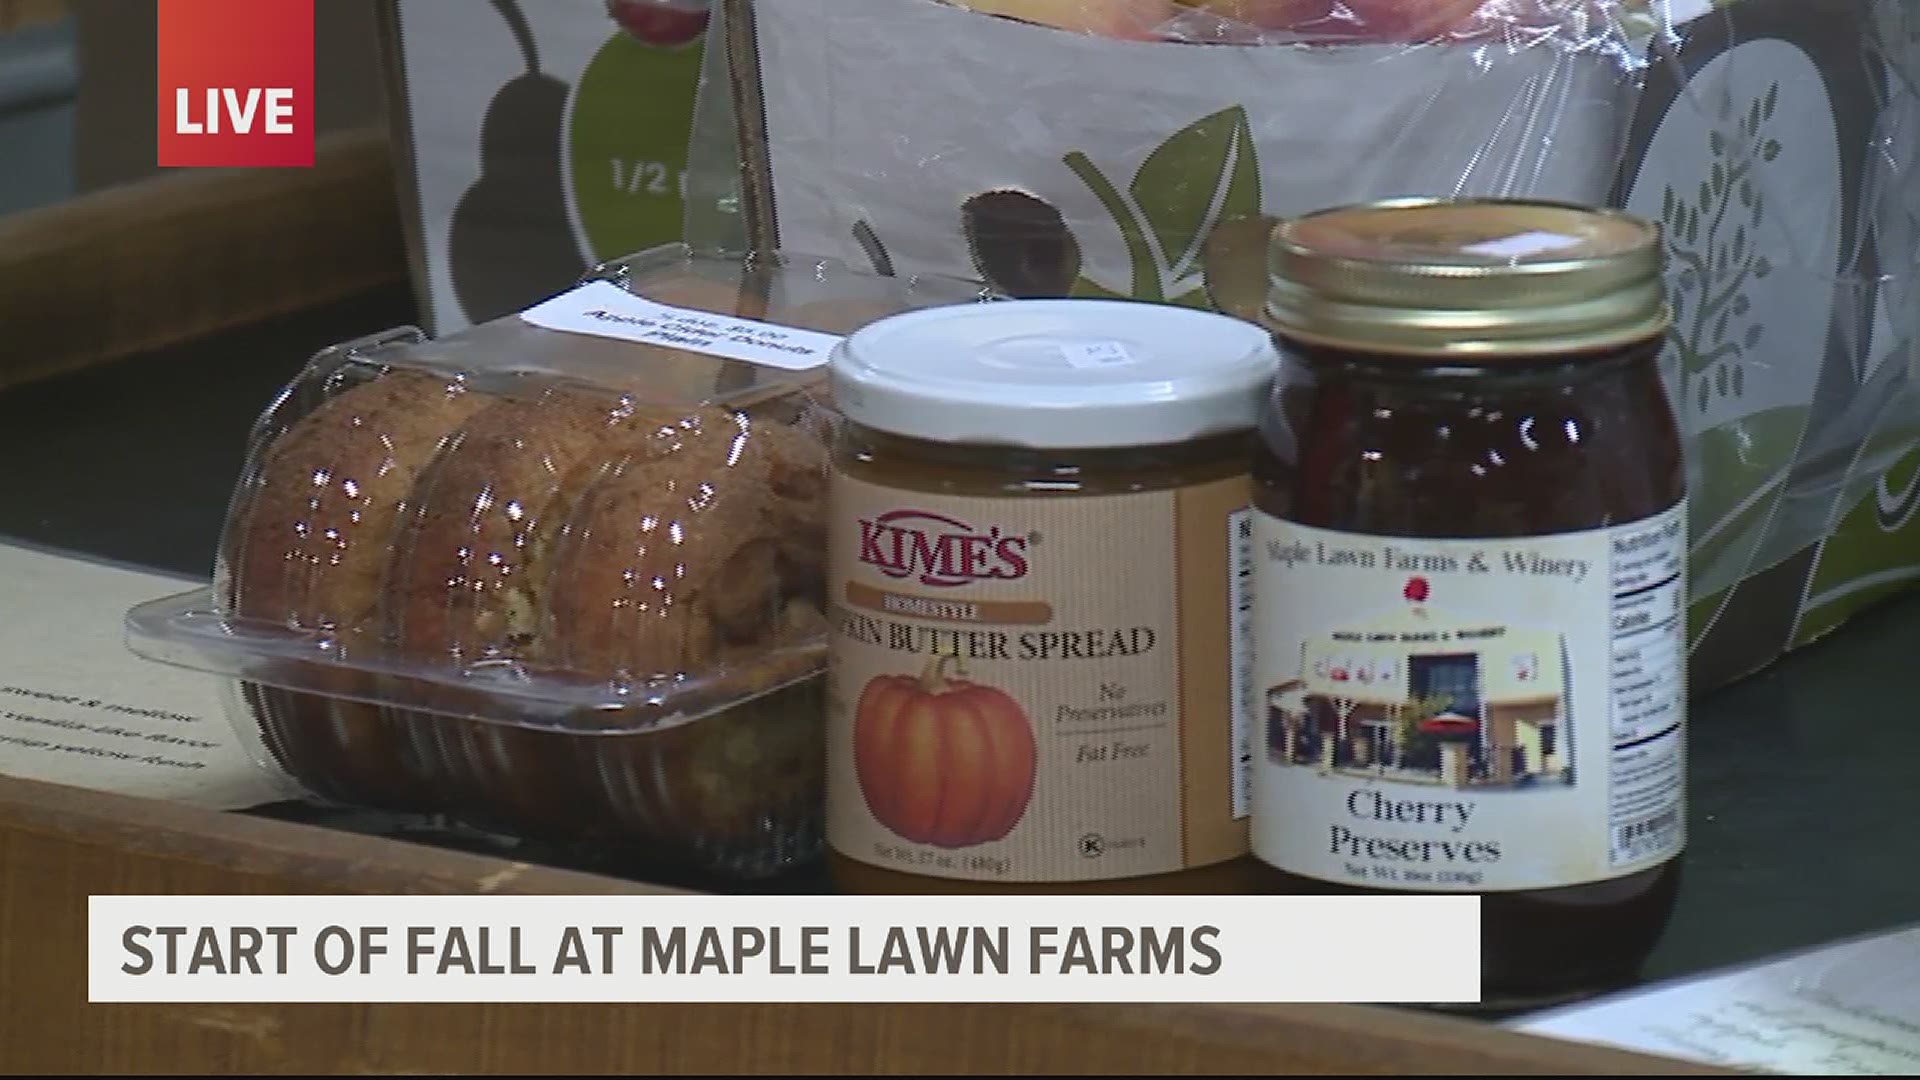 Tuesday marks the official start of Fall. Maple Lawn Farms in York County has your returning fall favorites and more.